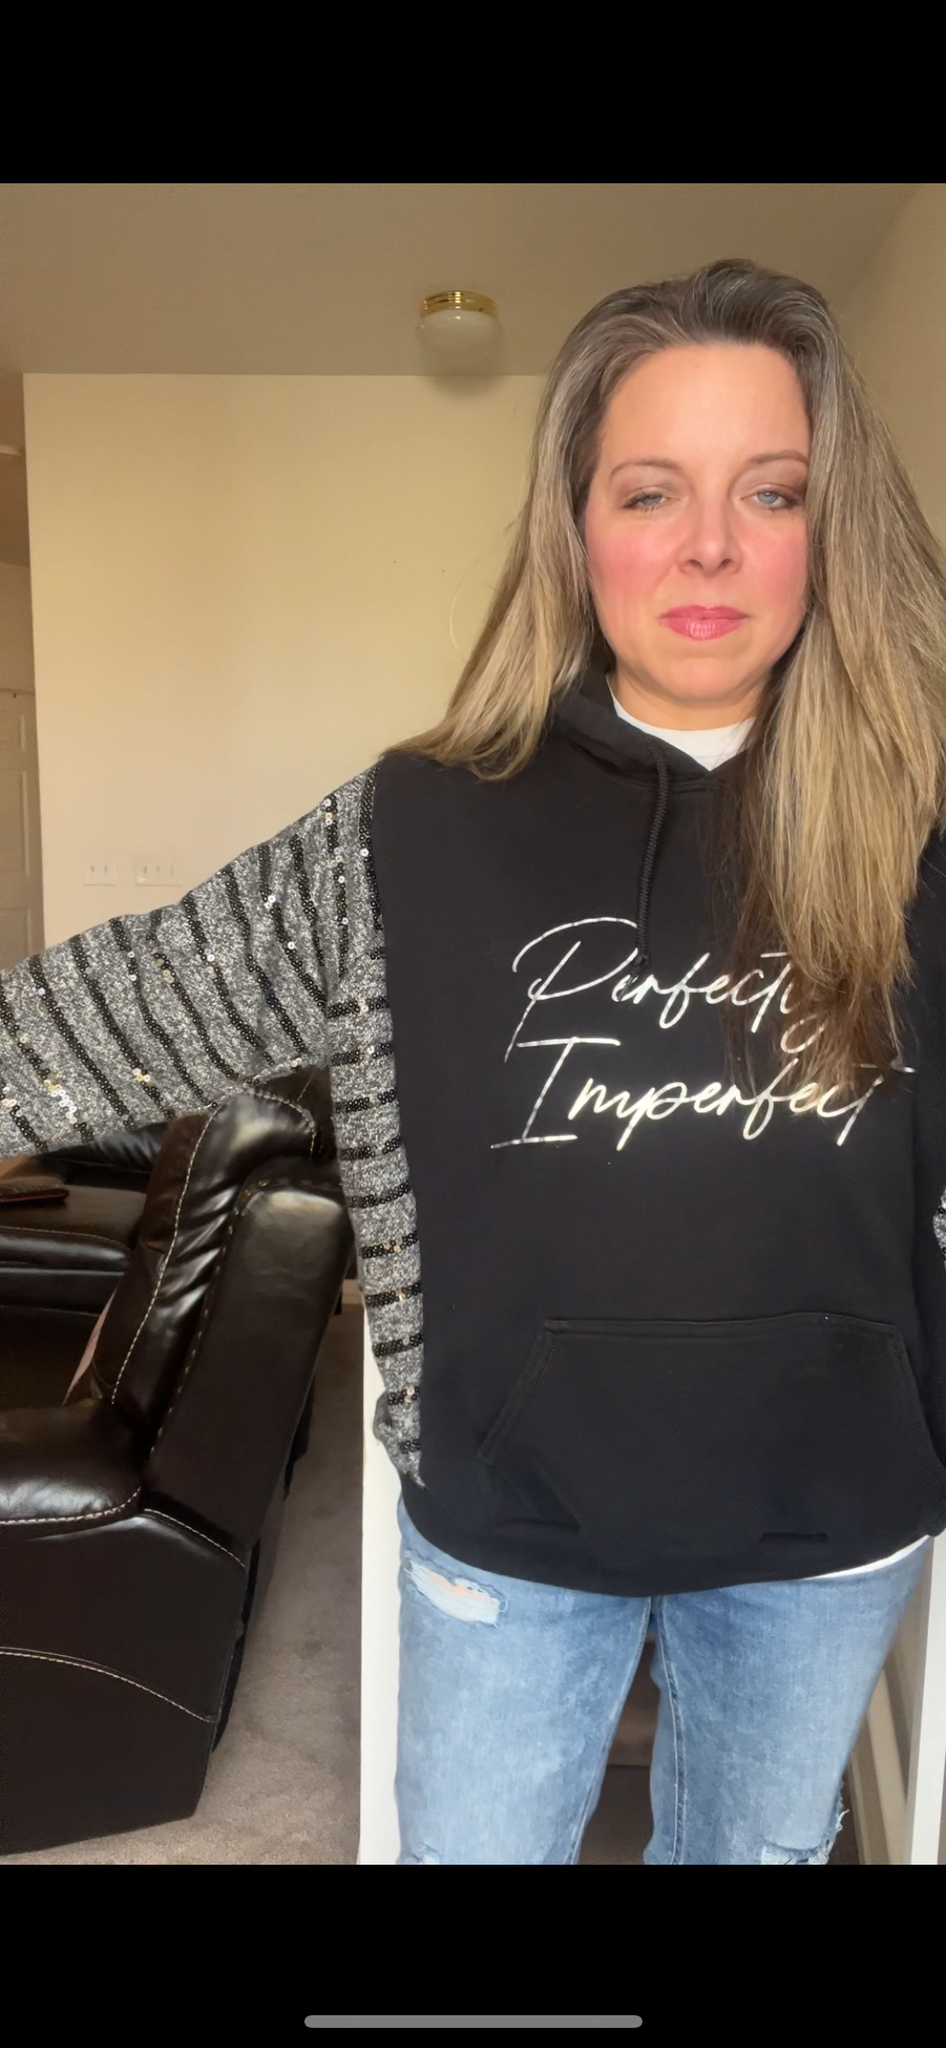 Upcycled Imperfect – women’s L/XL – midweight sweatshirt with stretch knit sleeves￼